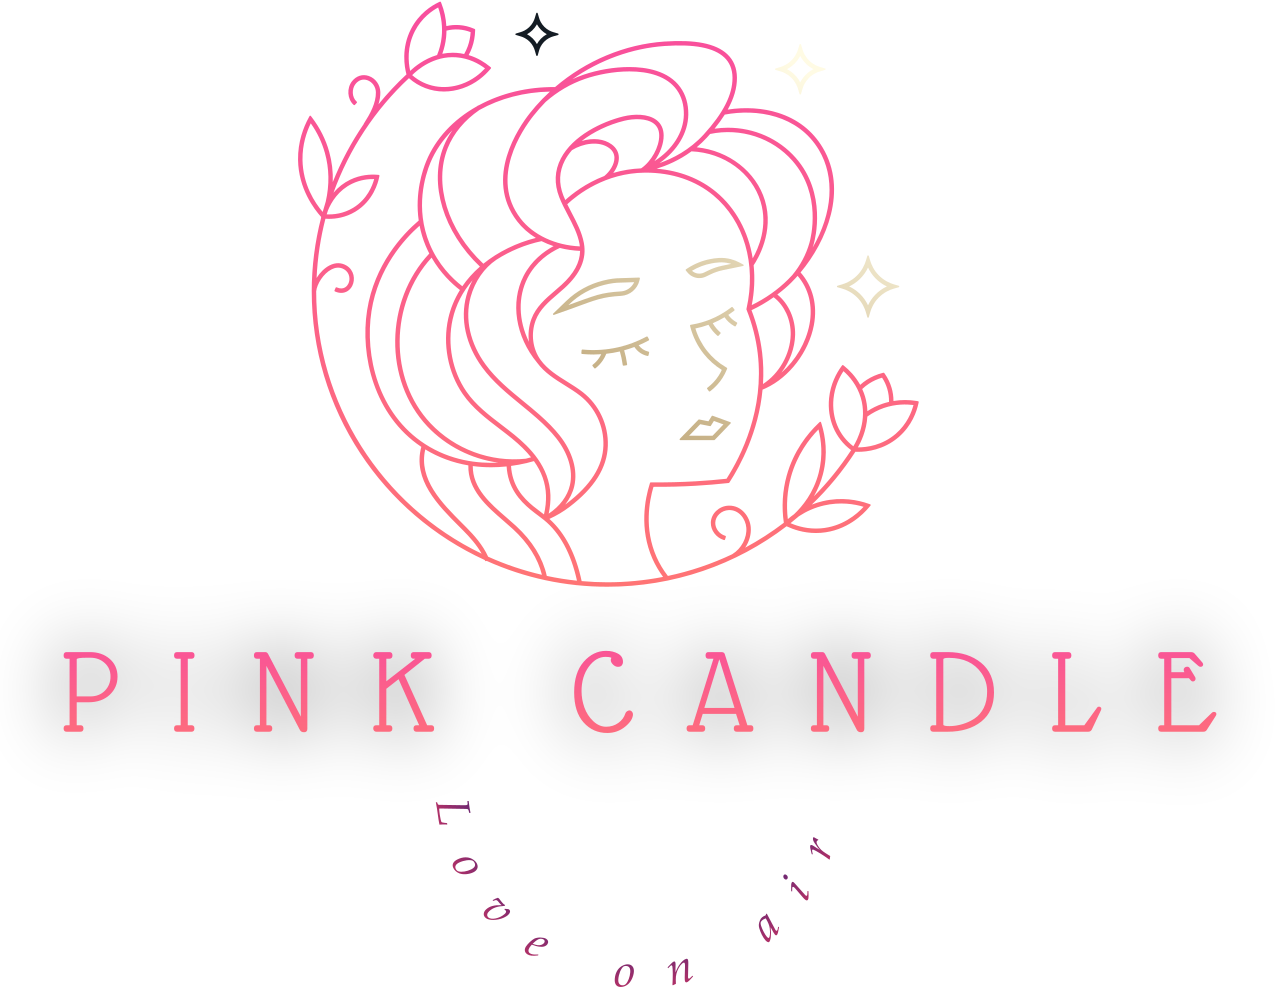 Pink candle 's logo